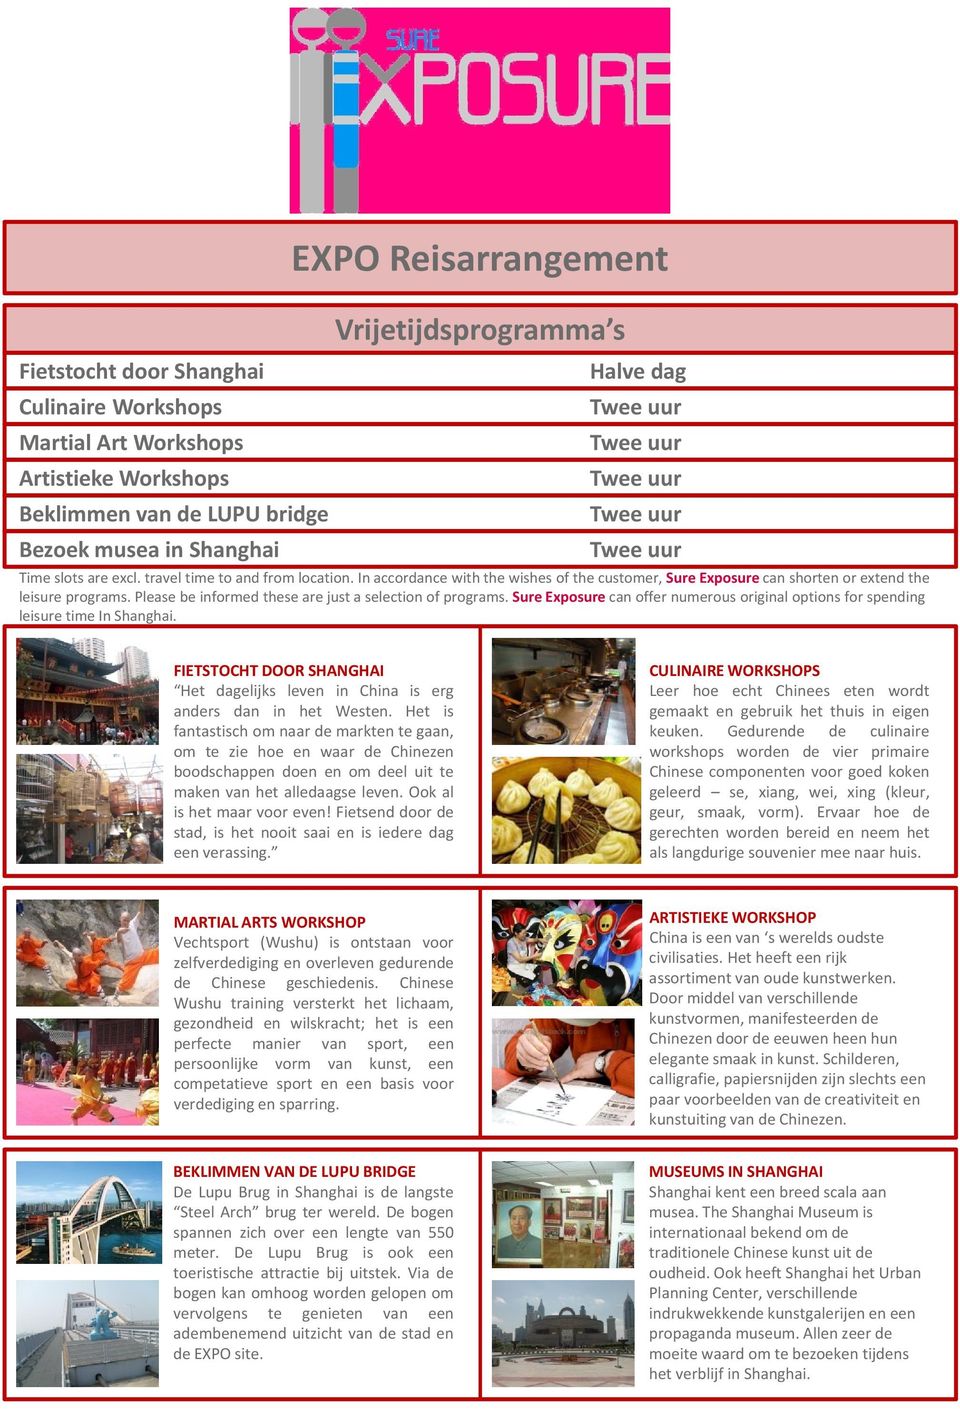 Please be informed these are just a selection of programs. Sure Exposure can offer numerous original options for spending leisure time In Shanghai.